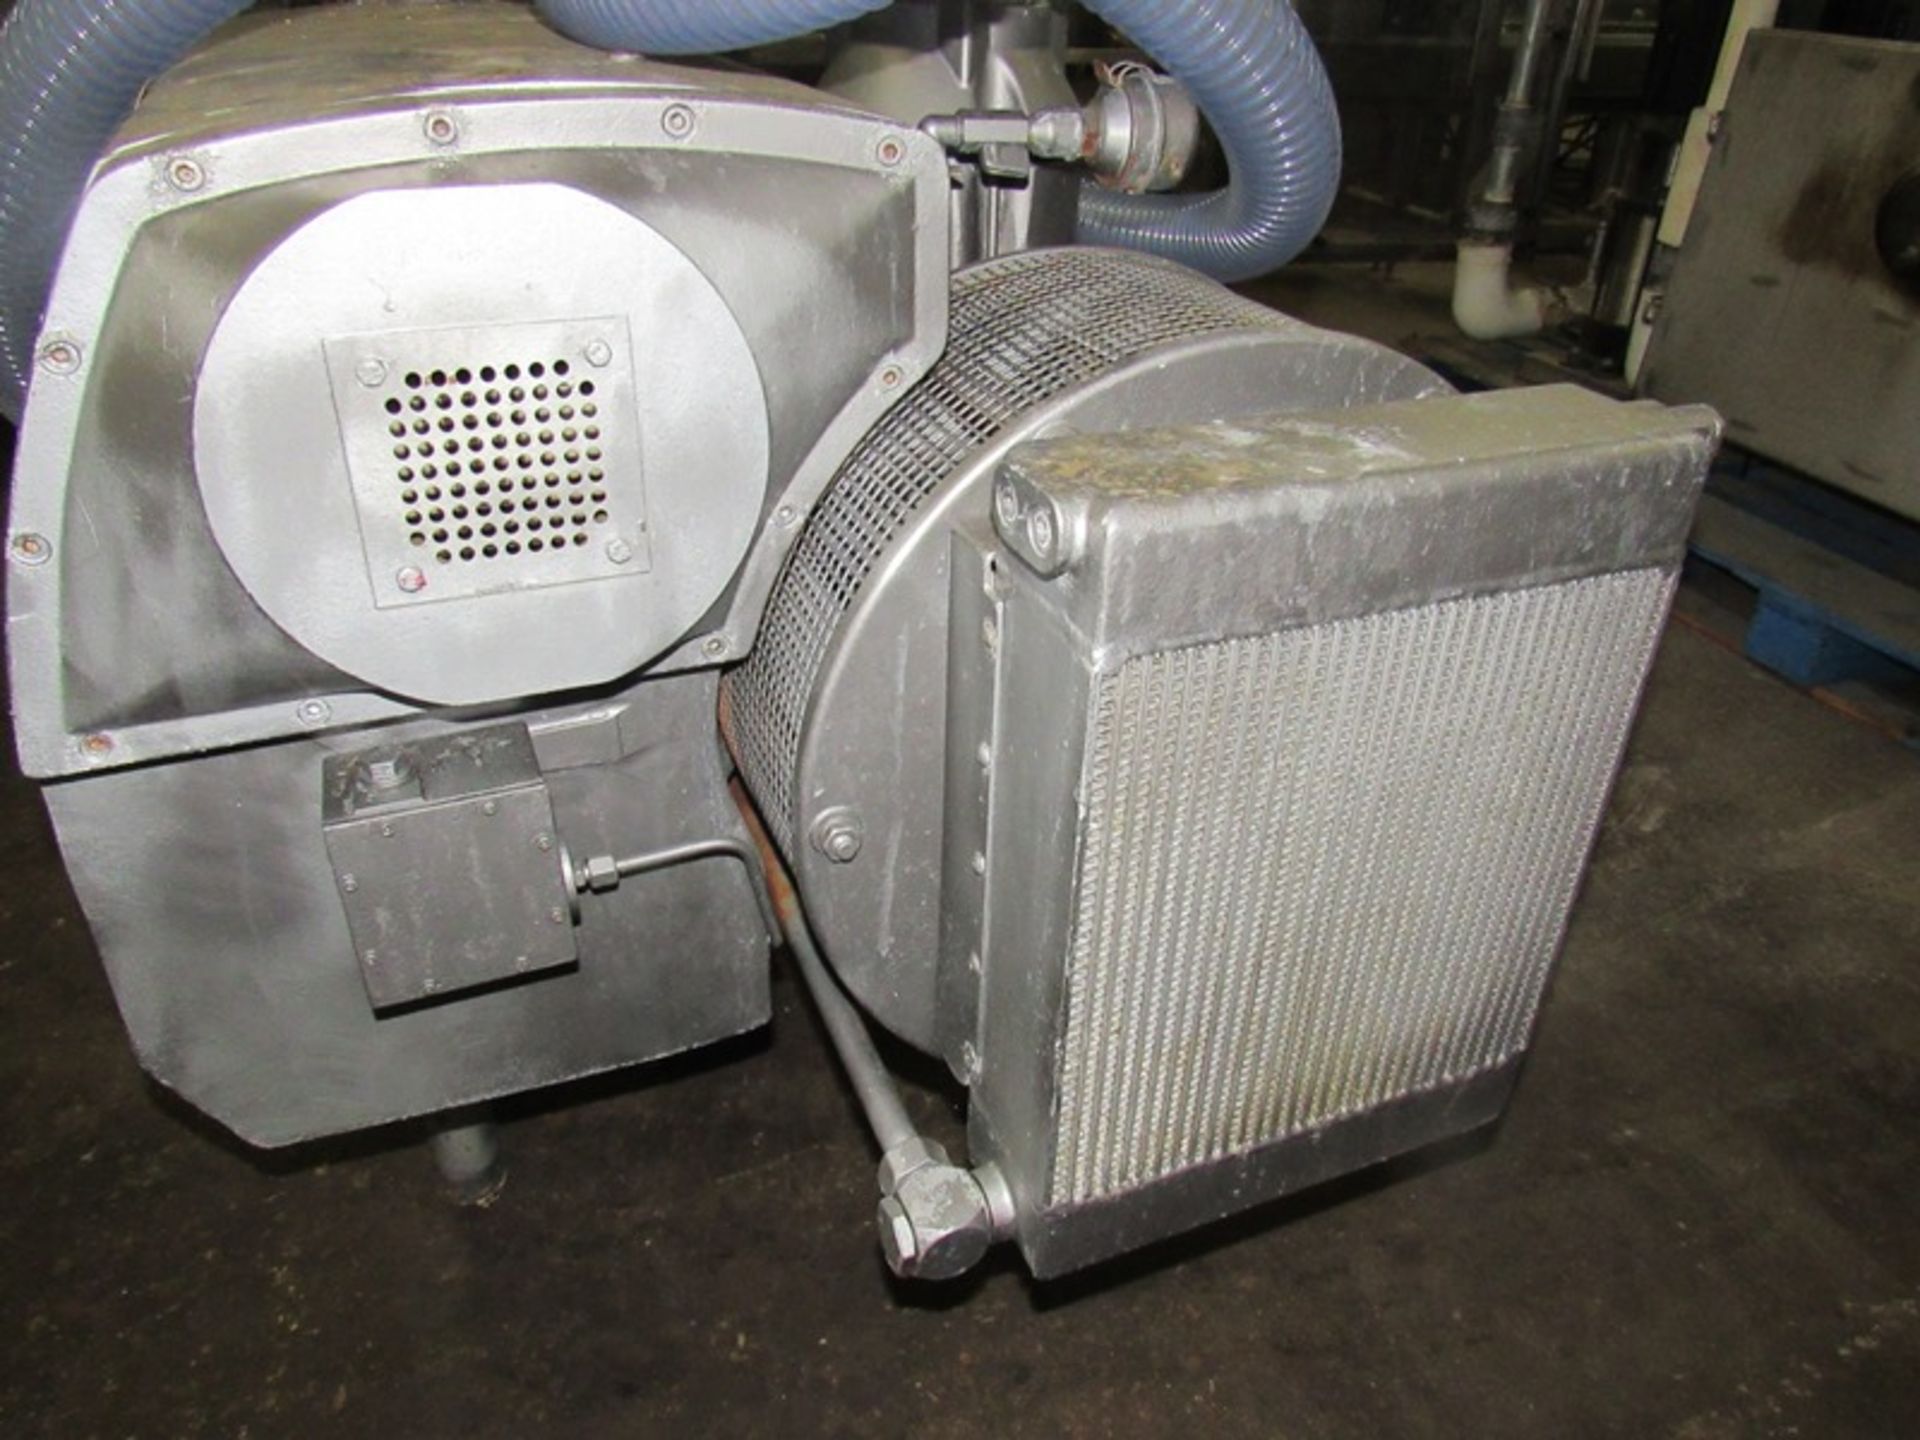 Busch Mdl. RA630 Vacuum Pump, 25 h.p., 230/460 volts, 3 phase, heat exchanger, rebuilt by TMS, - Image 3 of 5